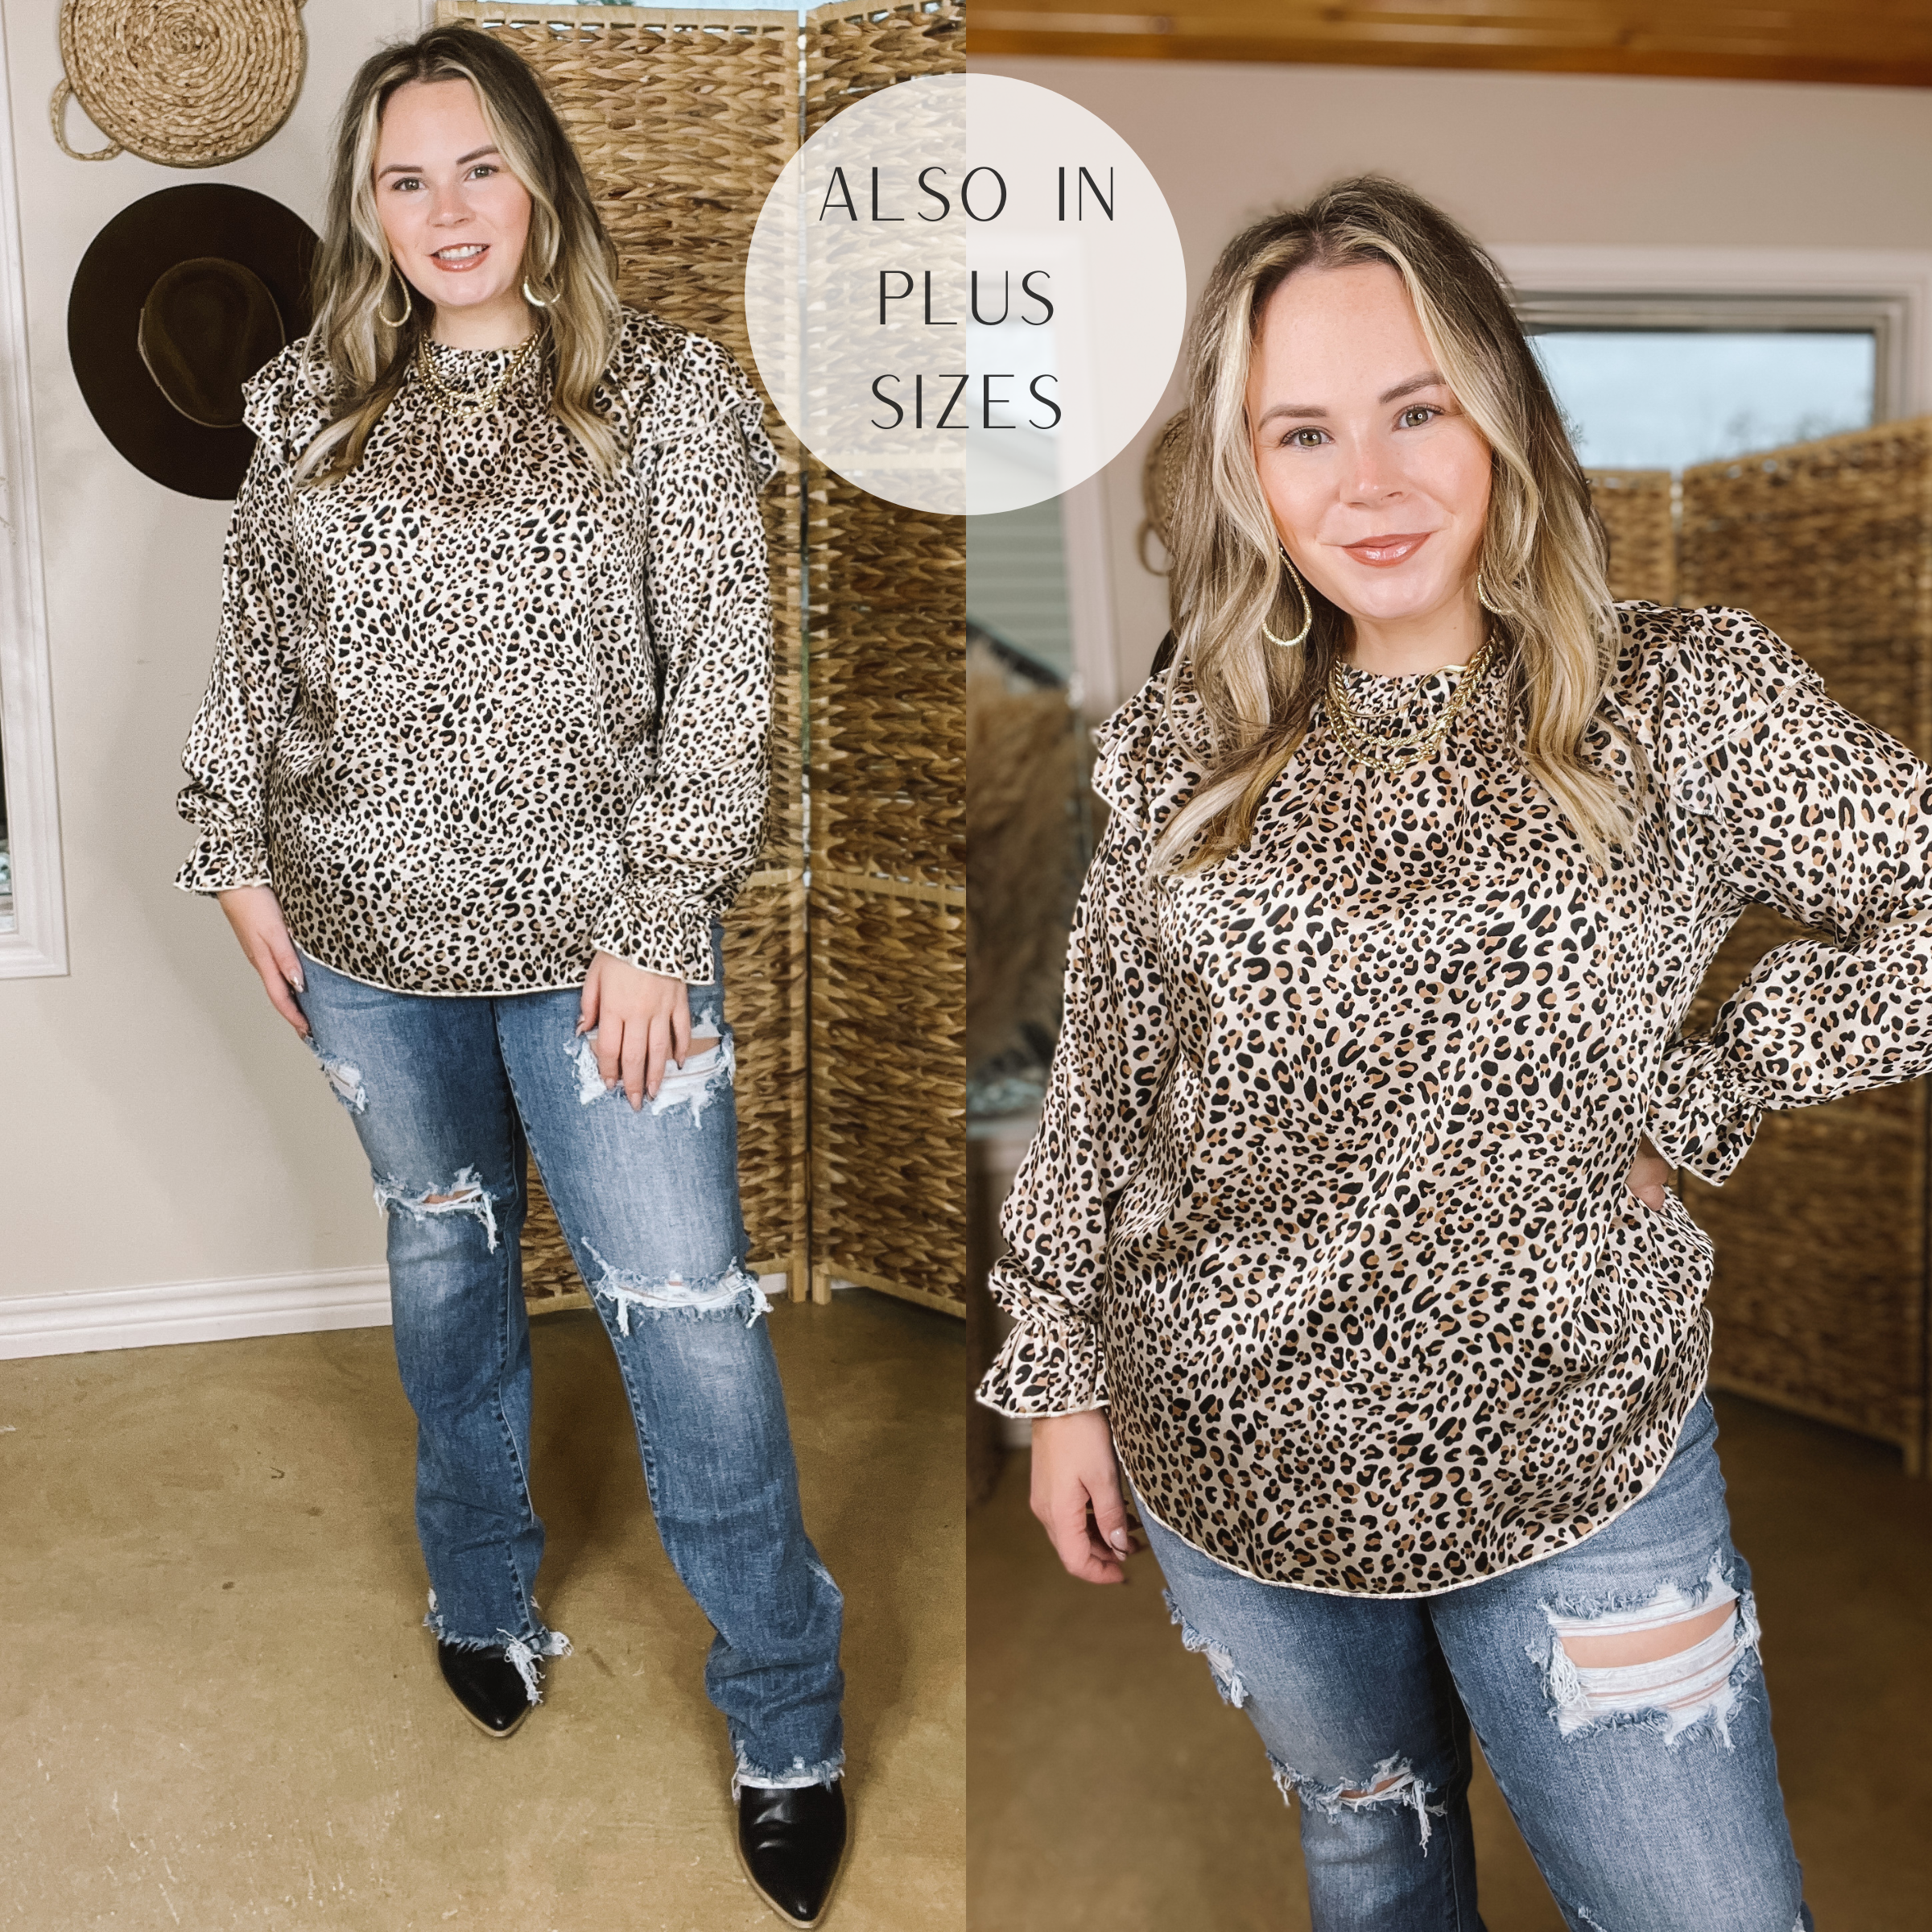 Model is wearing a leopard long sleeve shirt with ruffles long the shoulders.  Model has it paired with black booties, distressed jeans, and gold jewelry. 